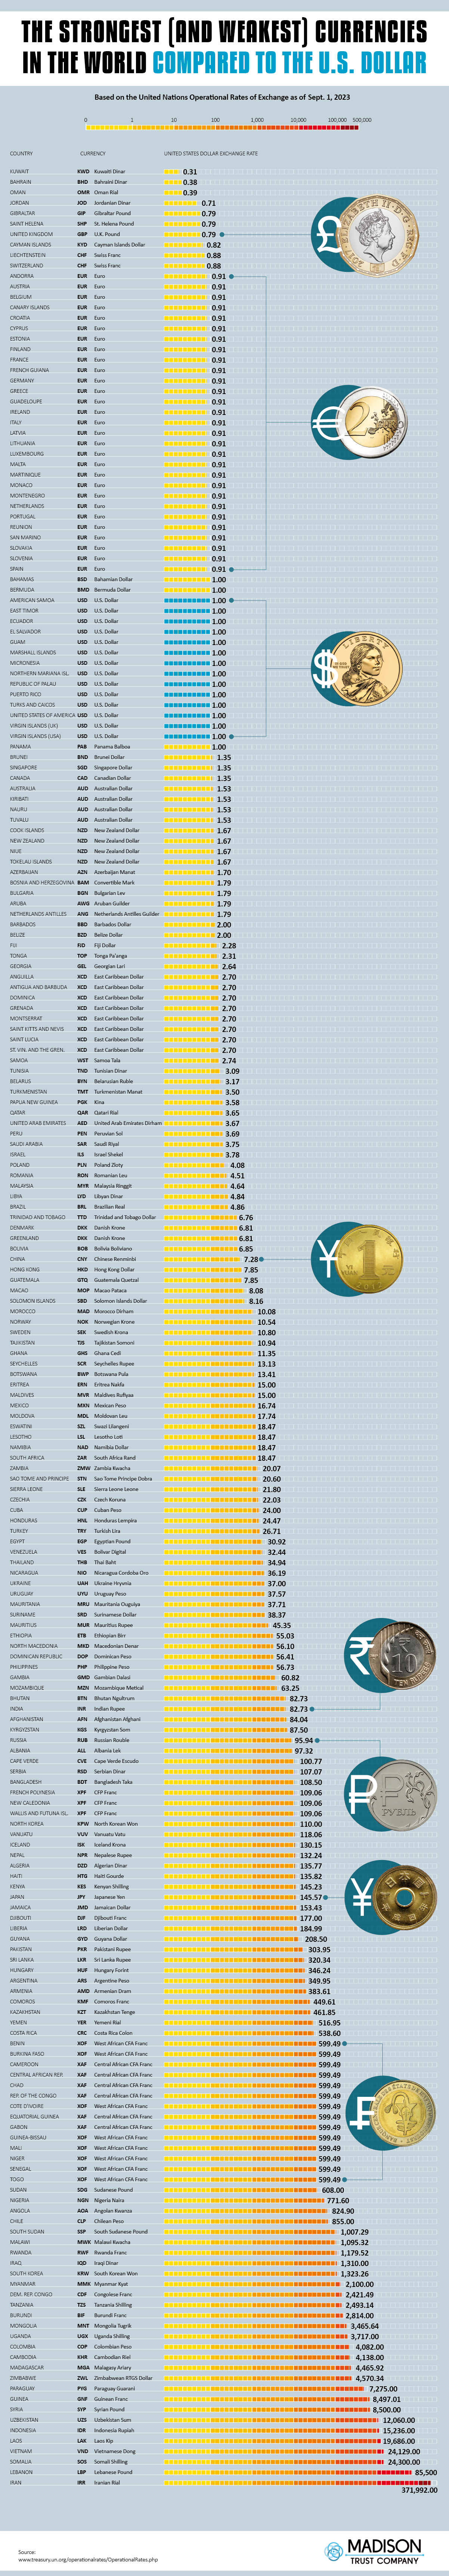 The Strongest (and Weakest) Currencies in the World Compared to